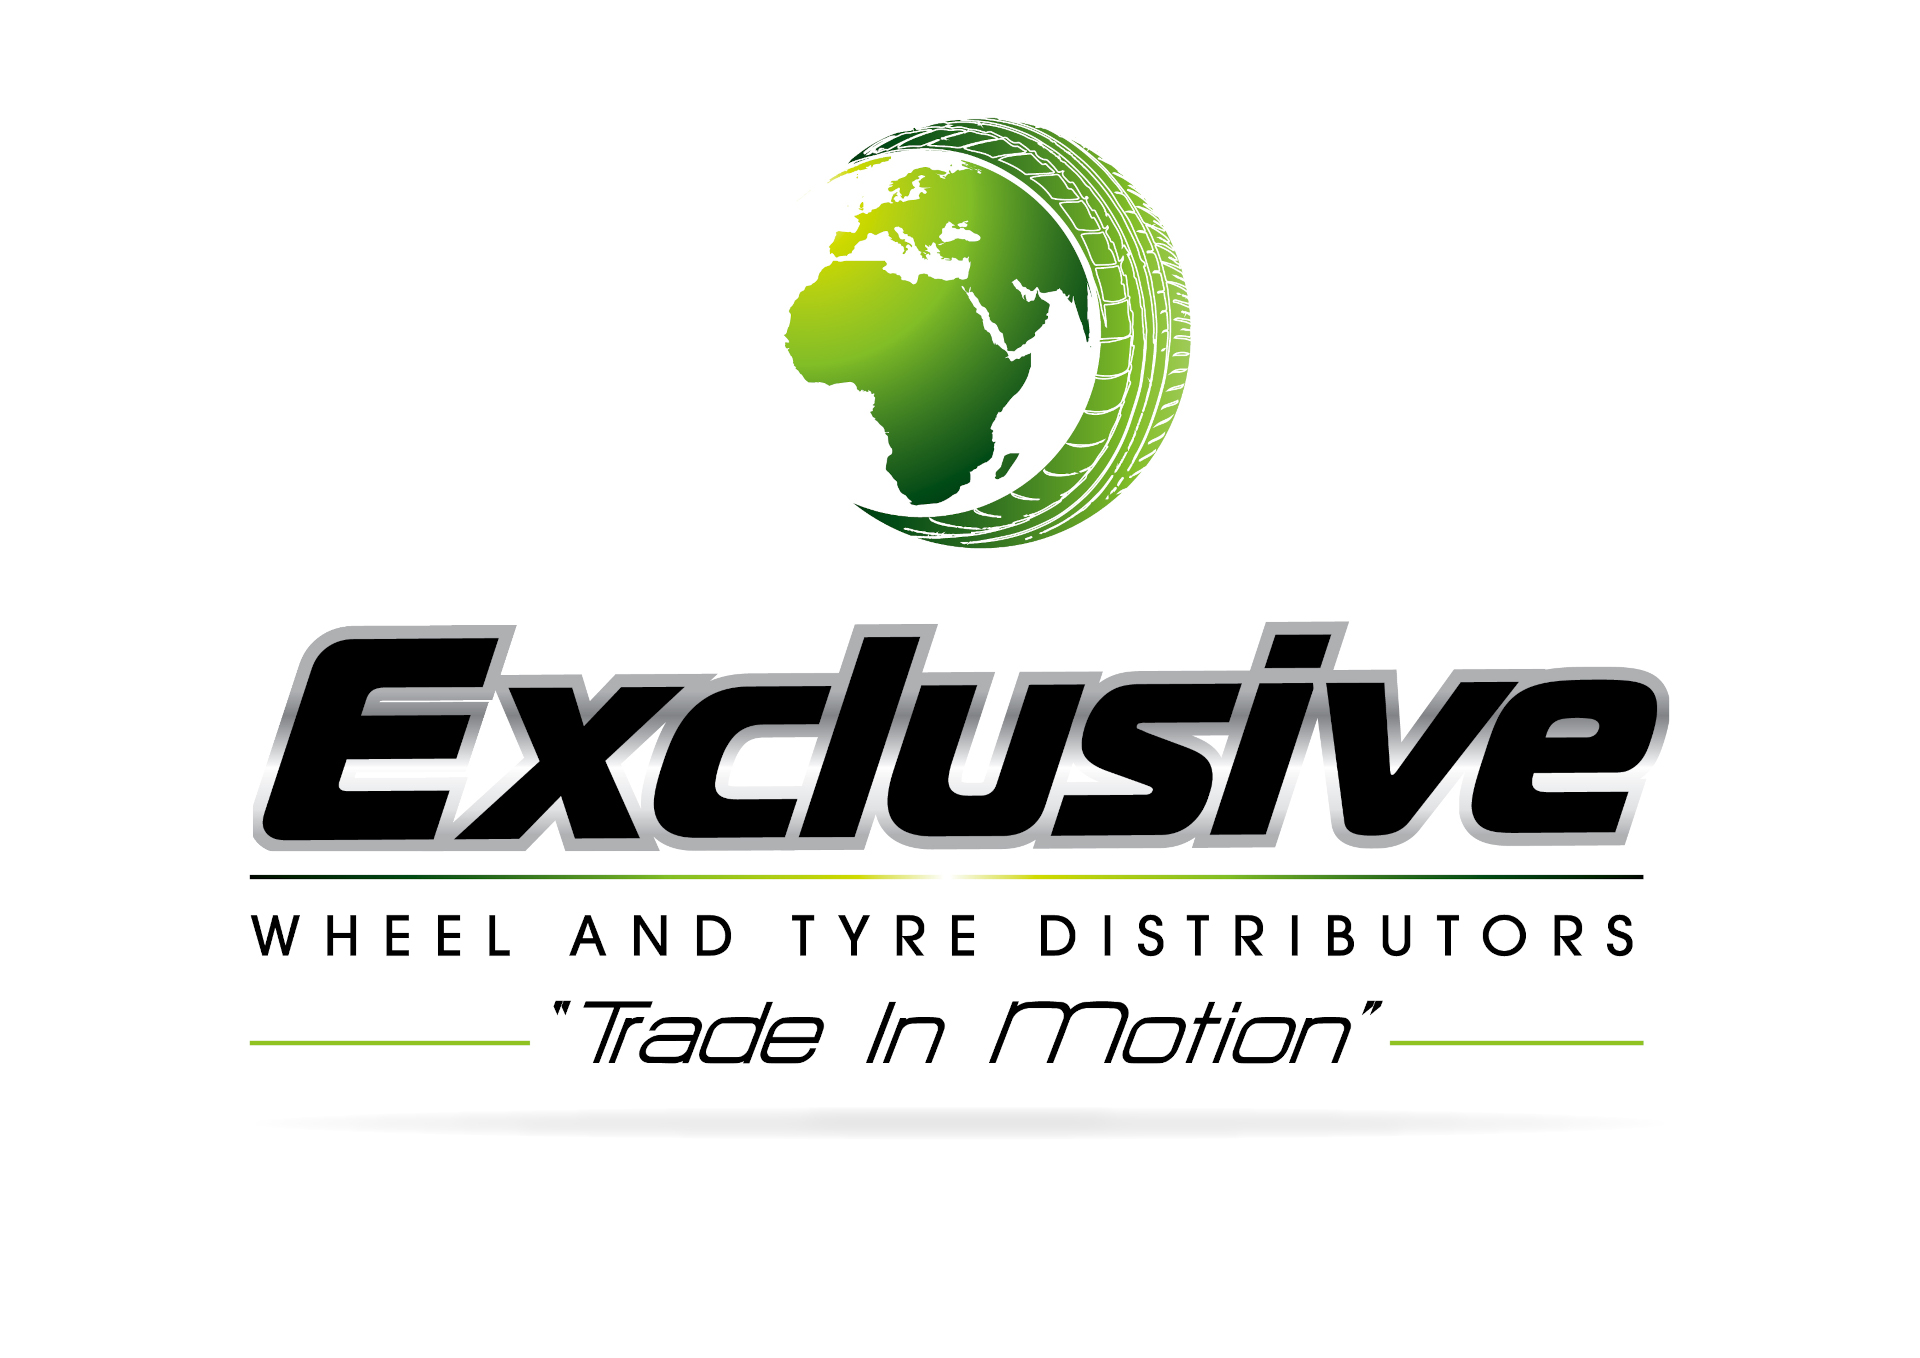 Goodyear announces partnership with Exclusive Wheel and Tyre Distributors